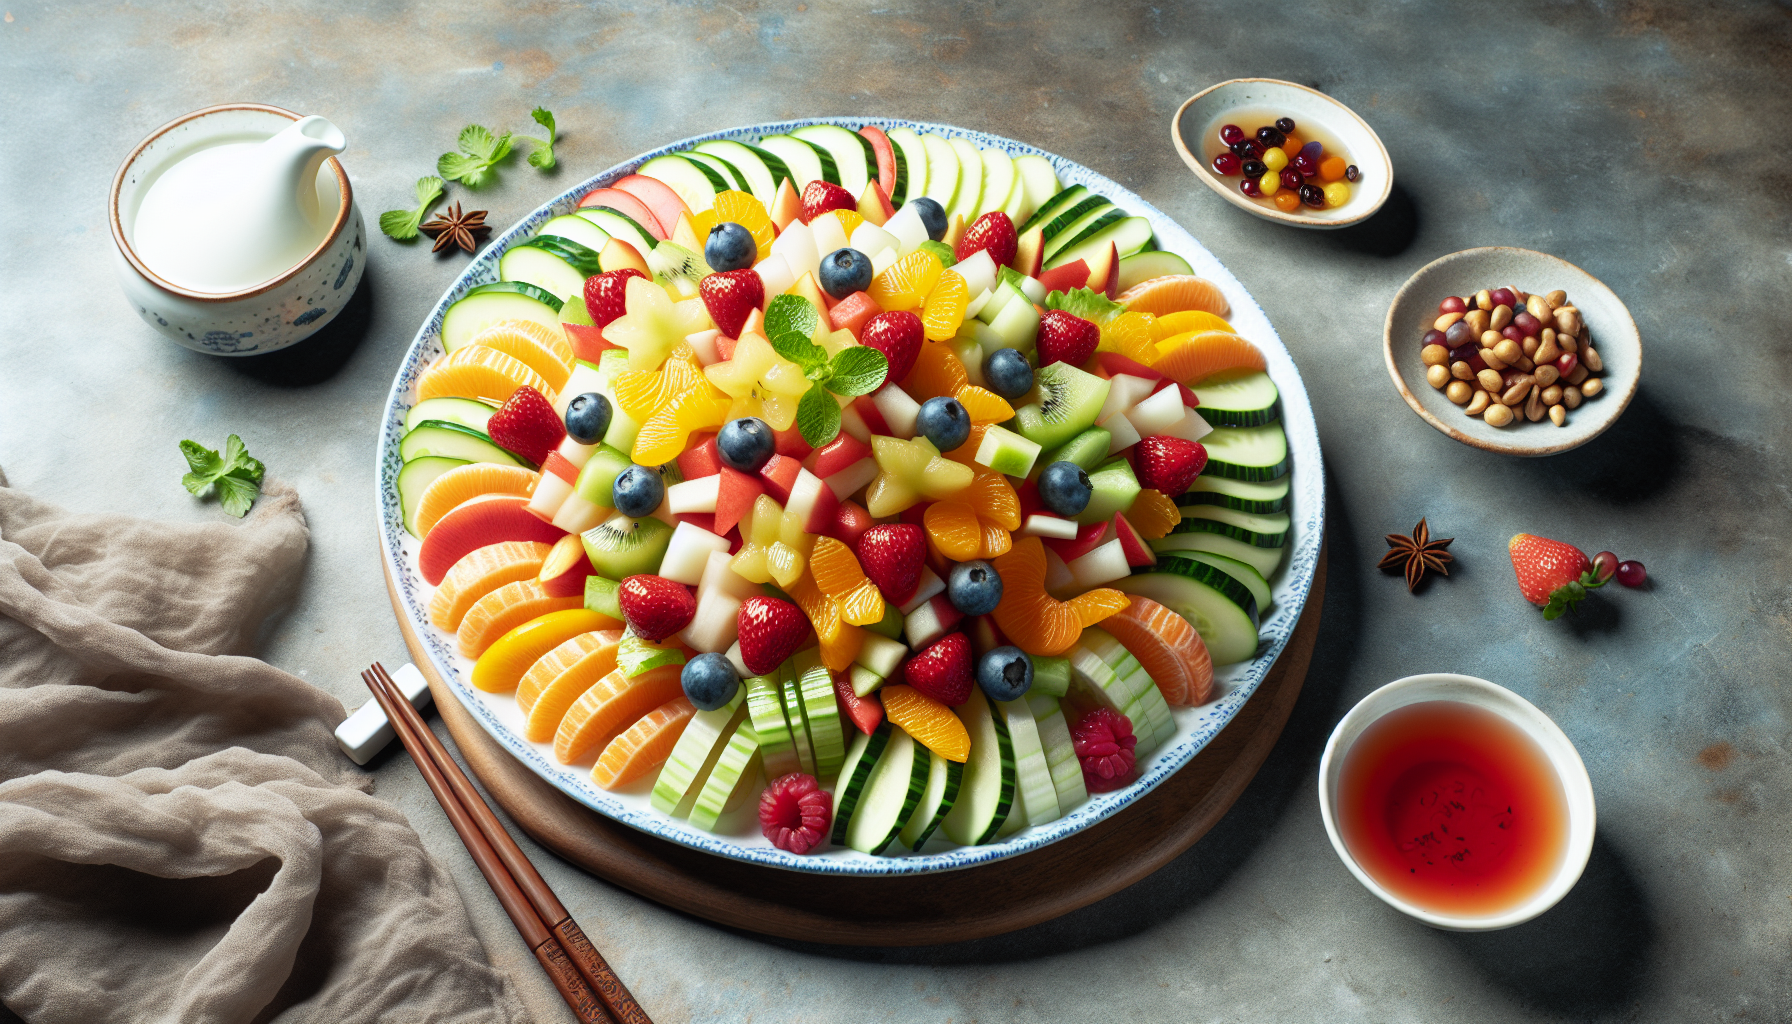 Can You Suggest A Nutritious And Refreshing Chinese Dish For A Hot Day?